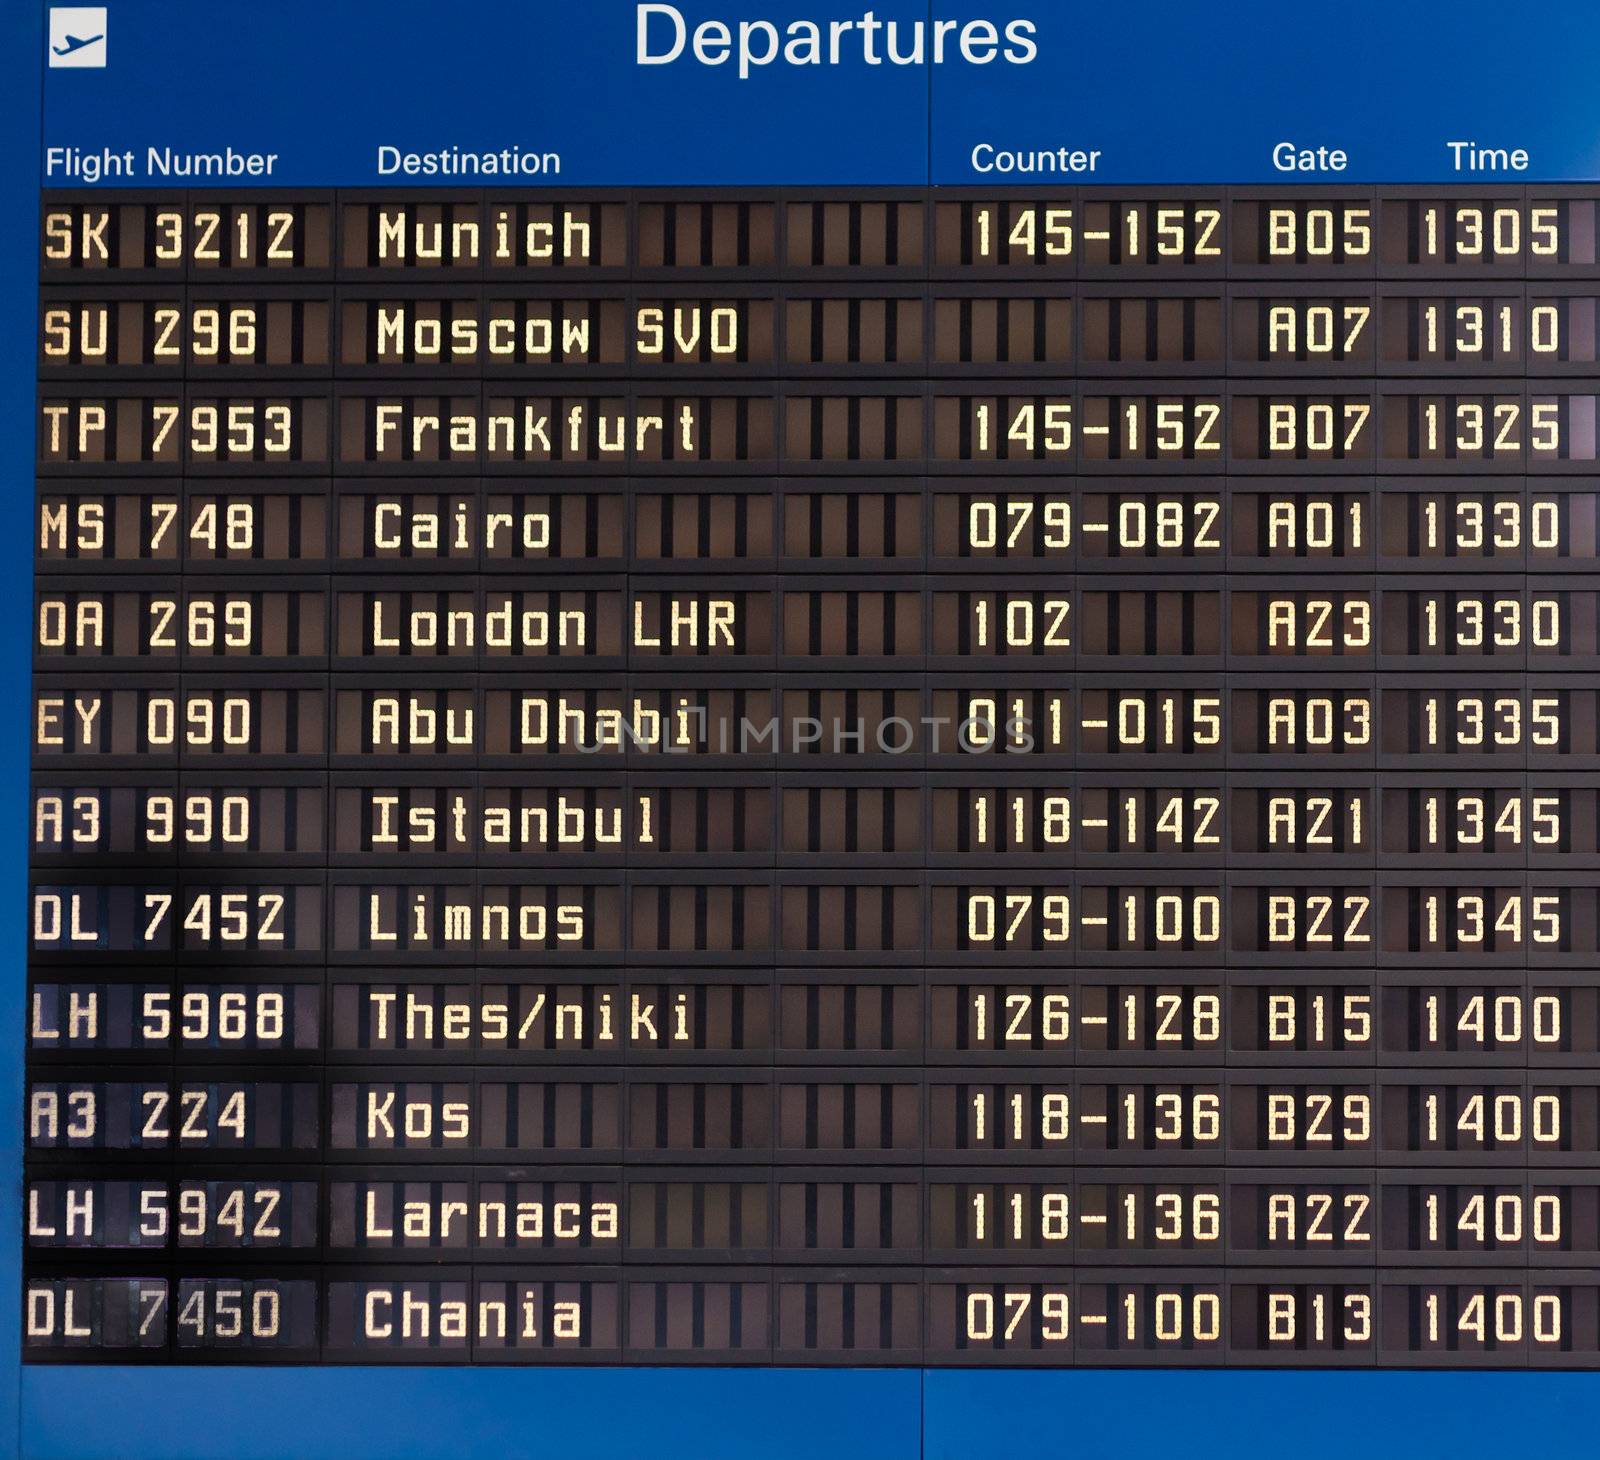 Airport departures information board by PiLens